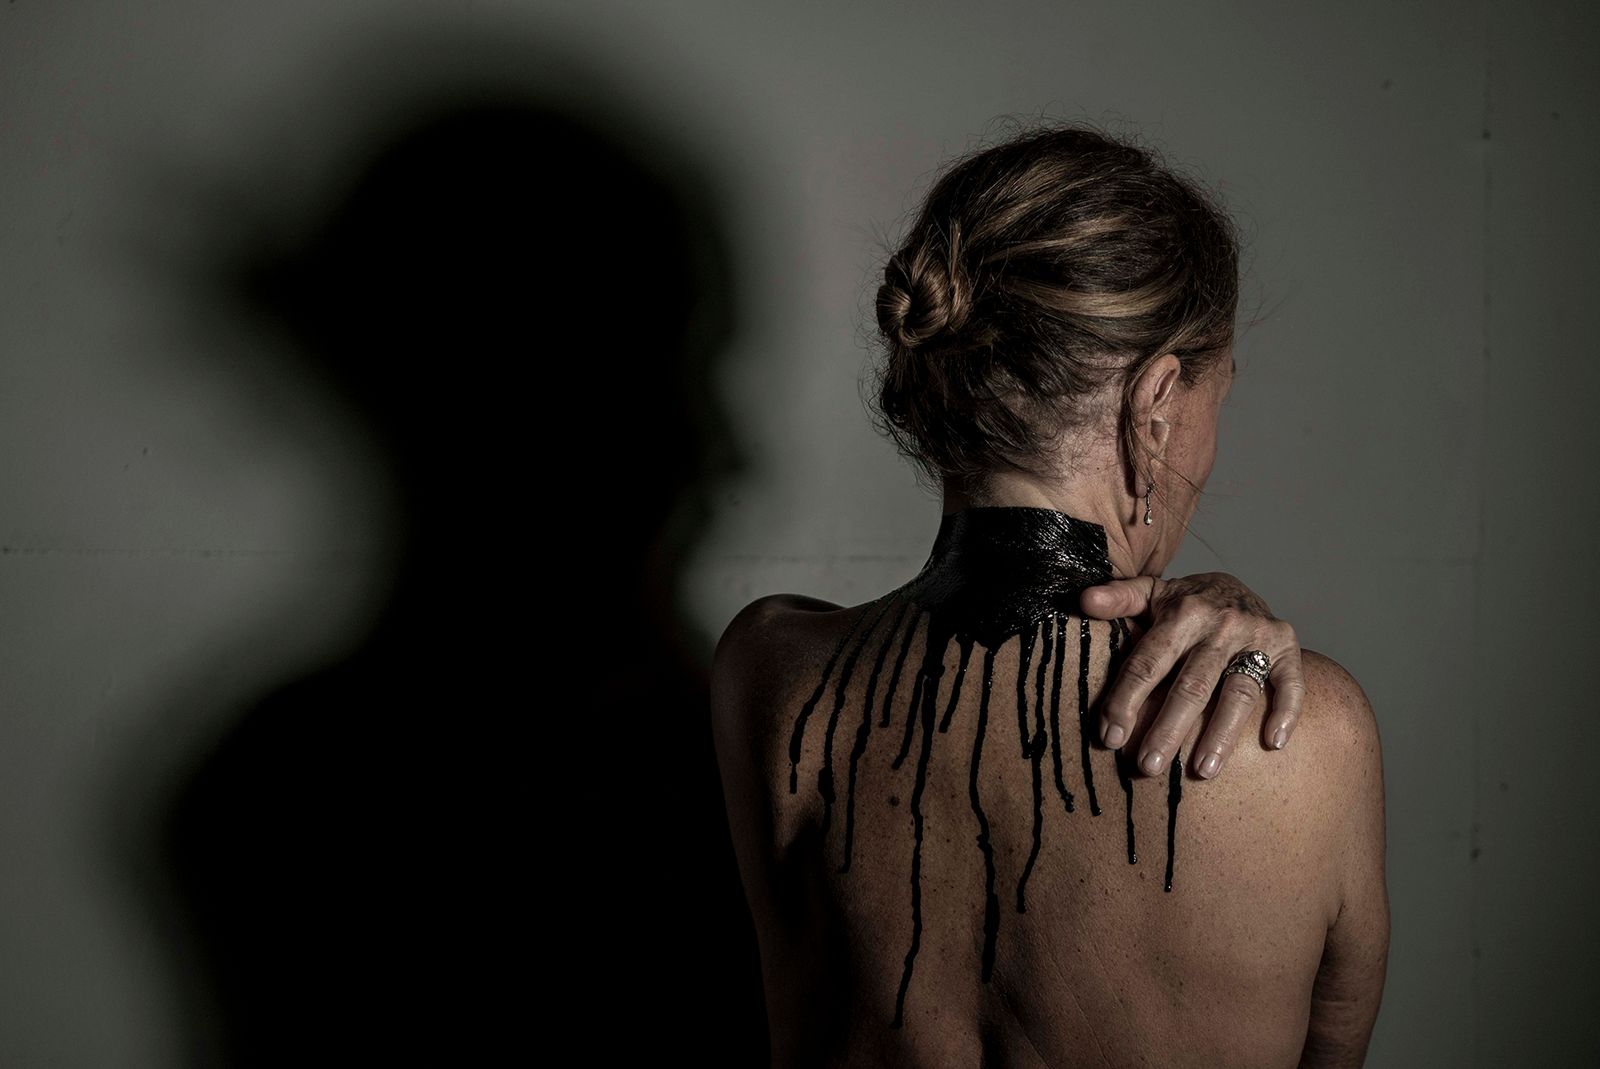 © Alexandra Dewez - Image from the Next of Skin photography project